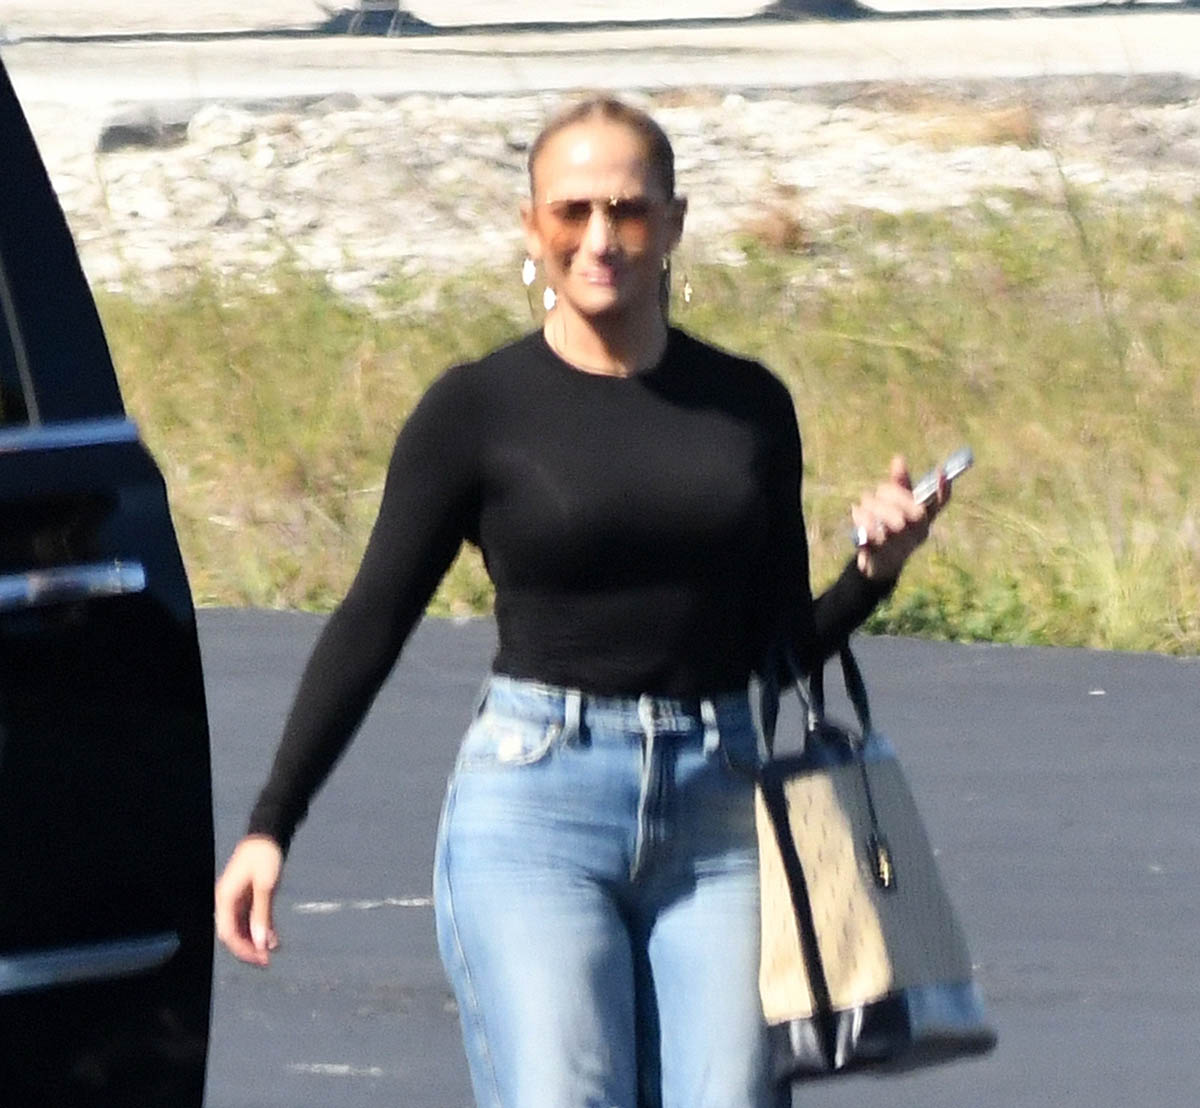 Jennifer Lopez boards a private jet in Miami and returns to the gym as Ben Affleck was seen in LA with his kid - LaineyGossip